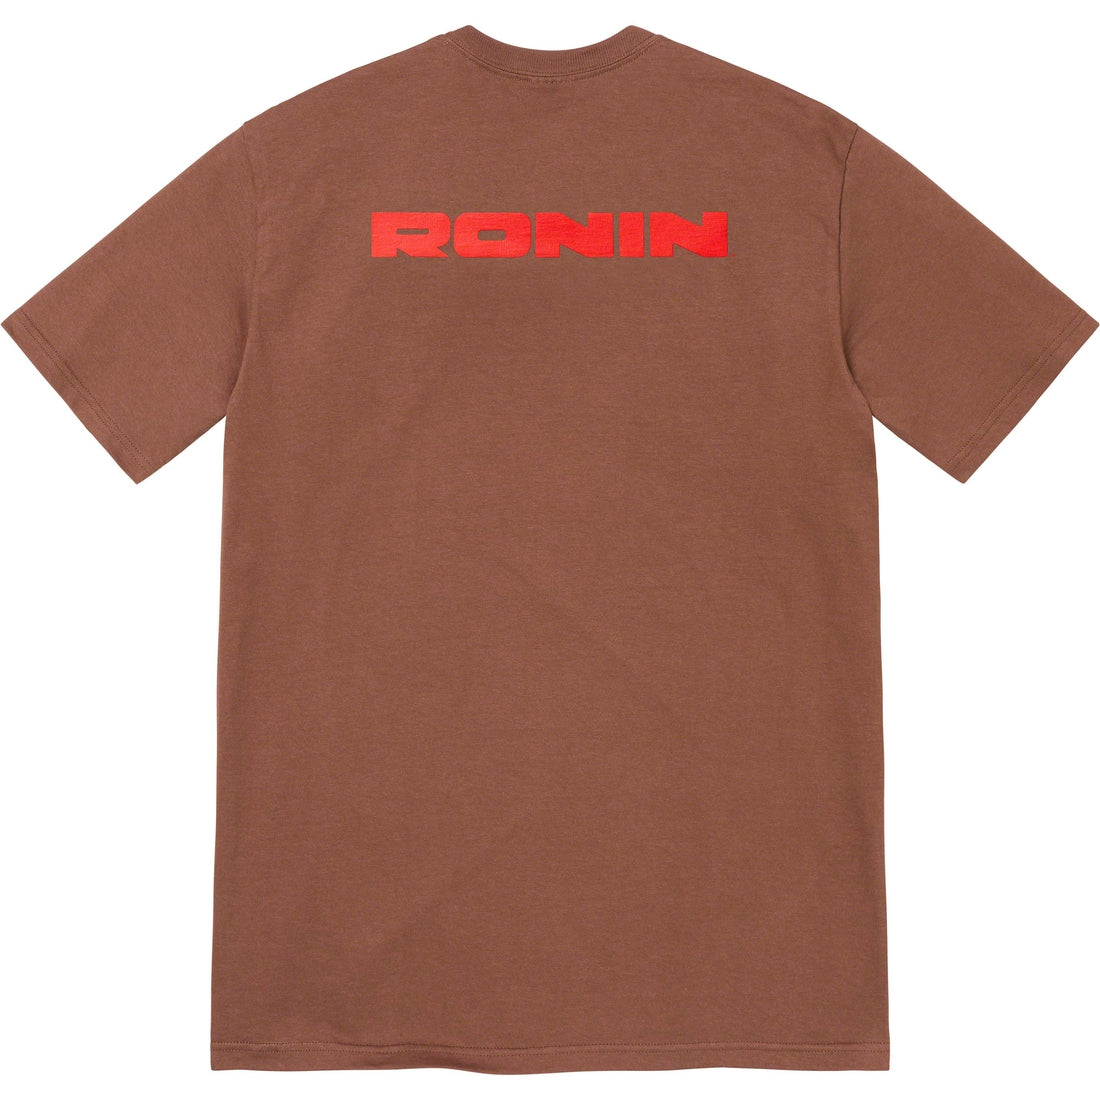 Supreme Ronin Tee - 澳門易購站mbuy. – mbuystore